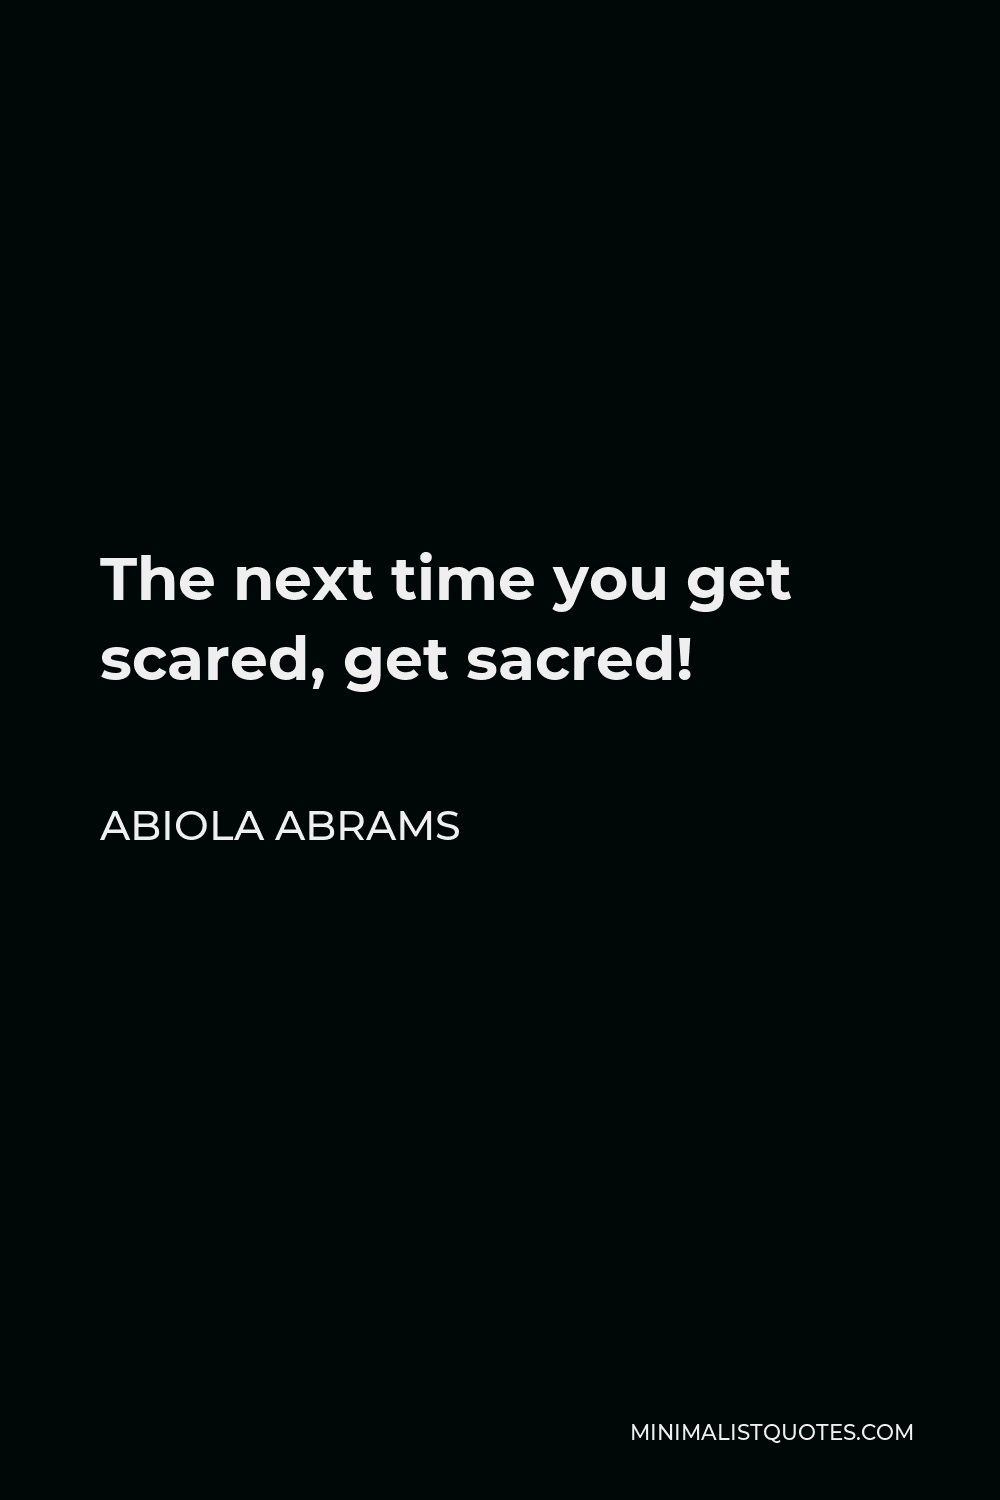 Abiola Abrams Quote - The next time you get scared, get sacred!